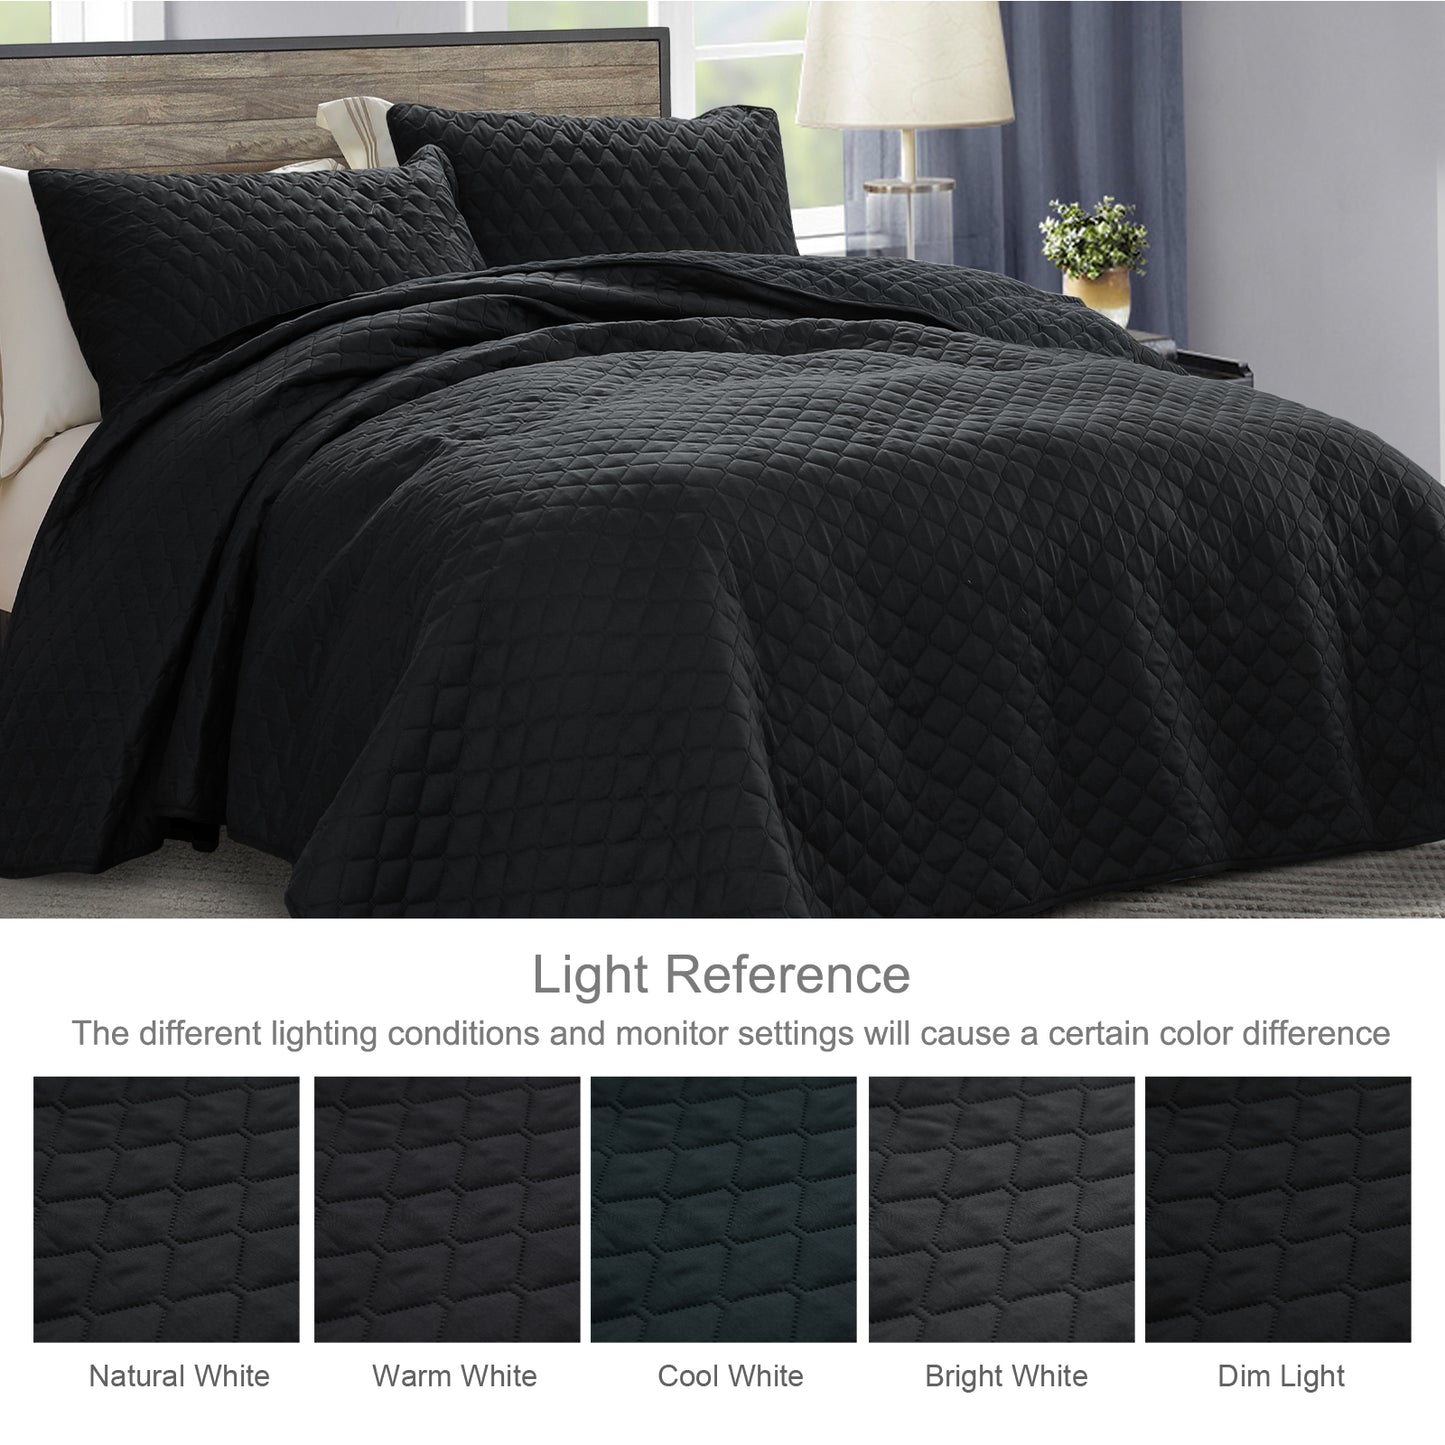 Exclusivo Mezcla Ultrasonic Reversible Full Queen Quilt Bedding Set with Pillow Shams, Lightweight Quilts Queen Size, Soft Bedspreads Bed Coverlets for All Seasons - (Black, 90"x96")